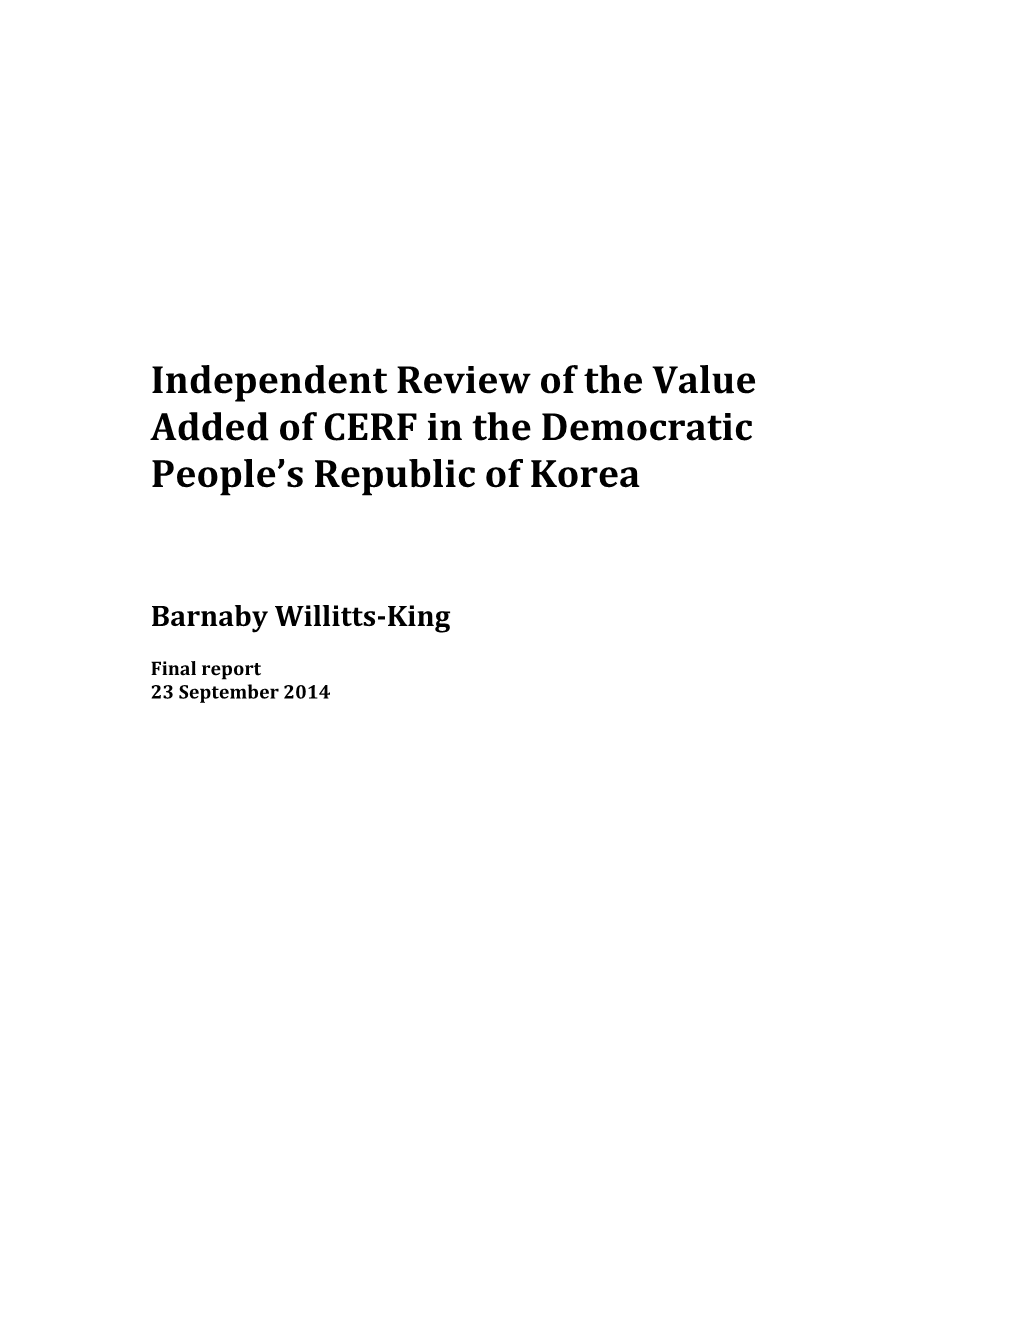 DPRK), As Part of the CERF Performance and Accountability Framework